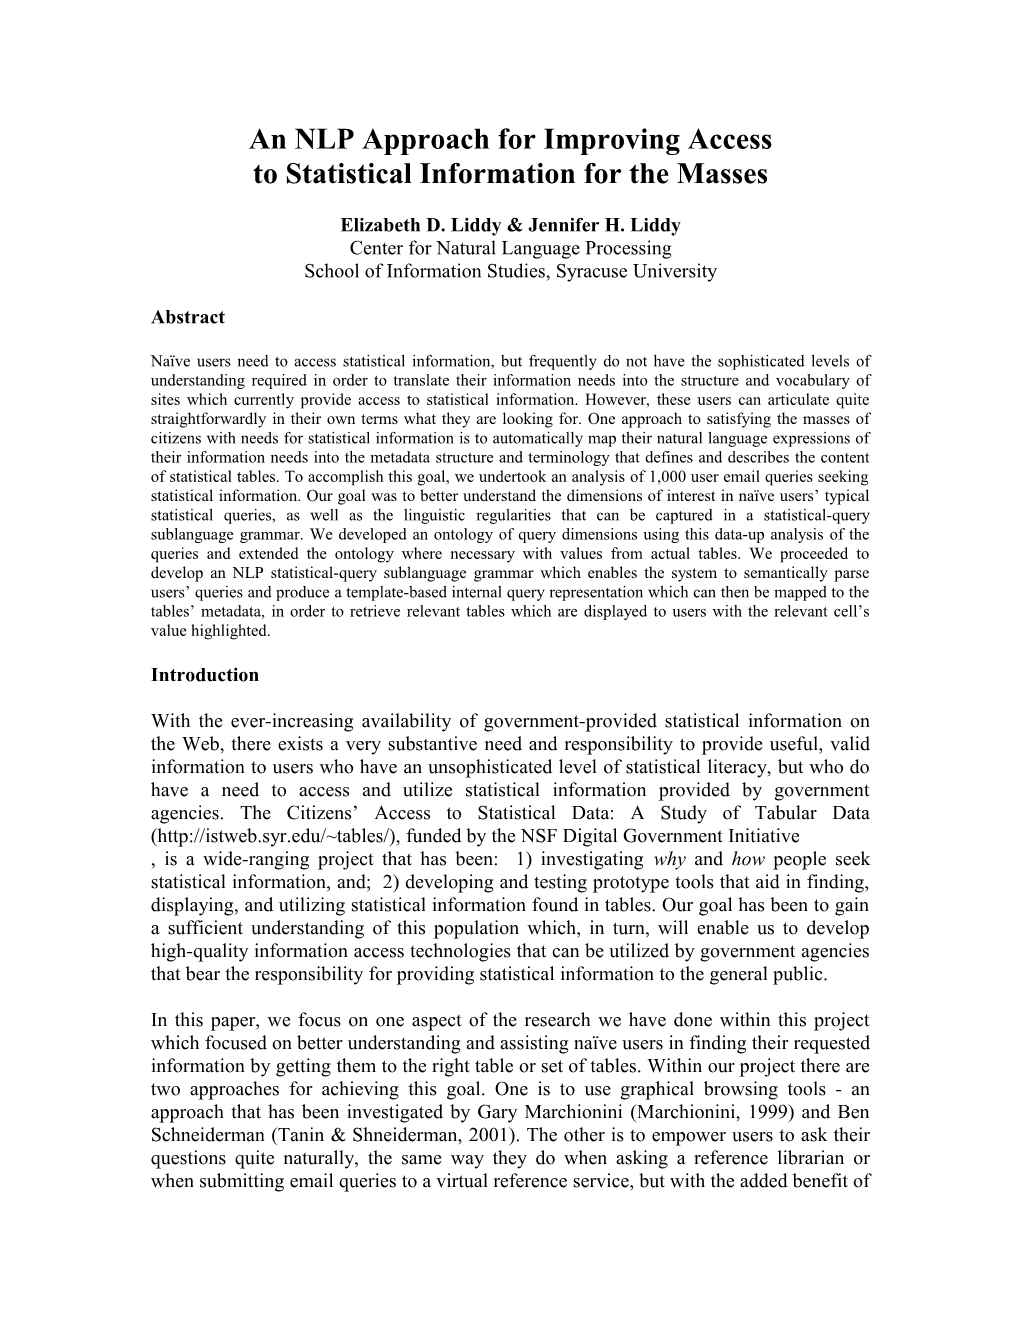 Improving Access to Statistical Information for the Masses